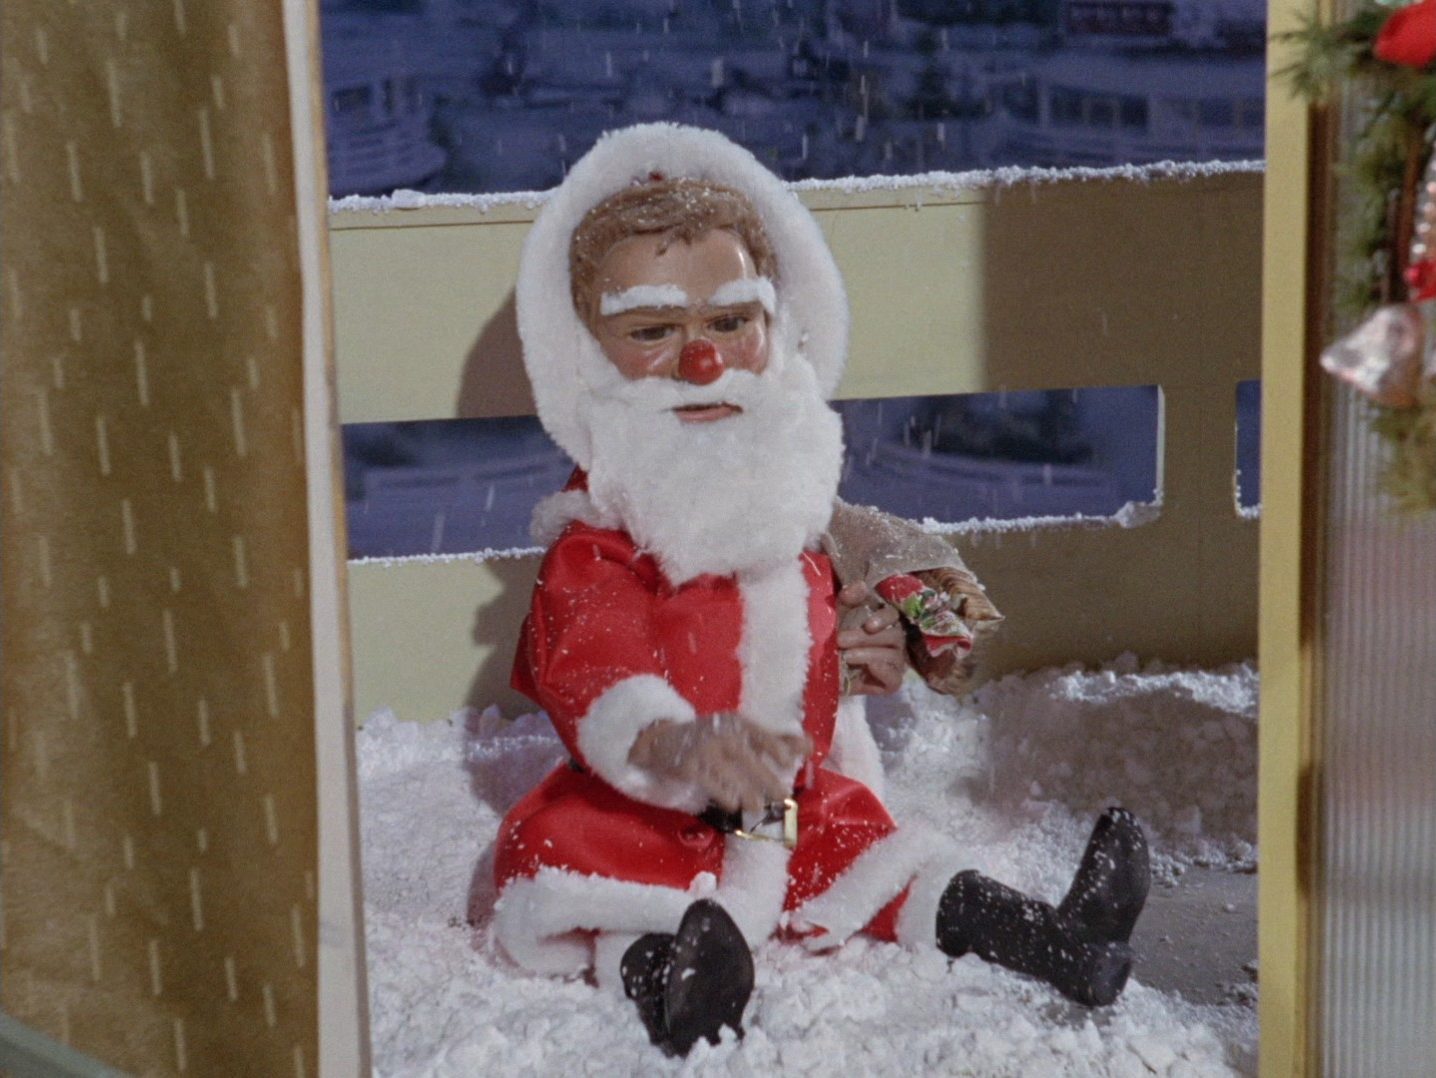 Phones the Red-Nosed Santa
in A Christmas To Remember